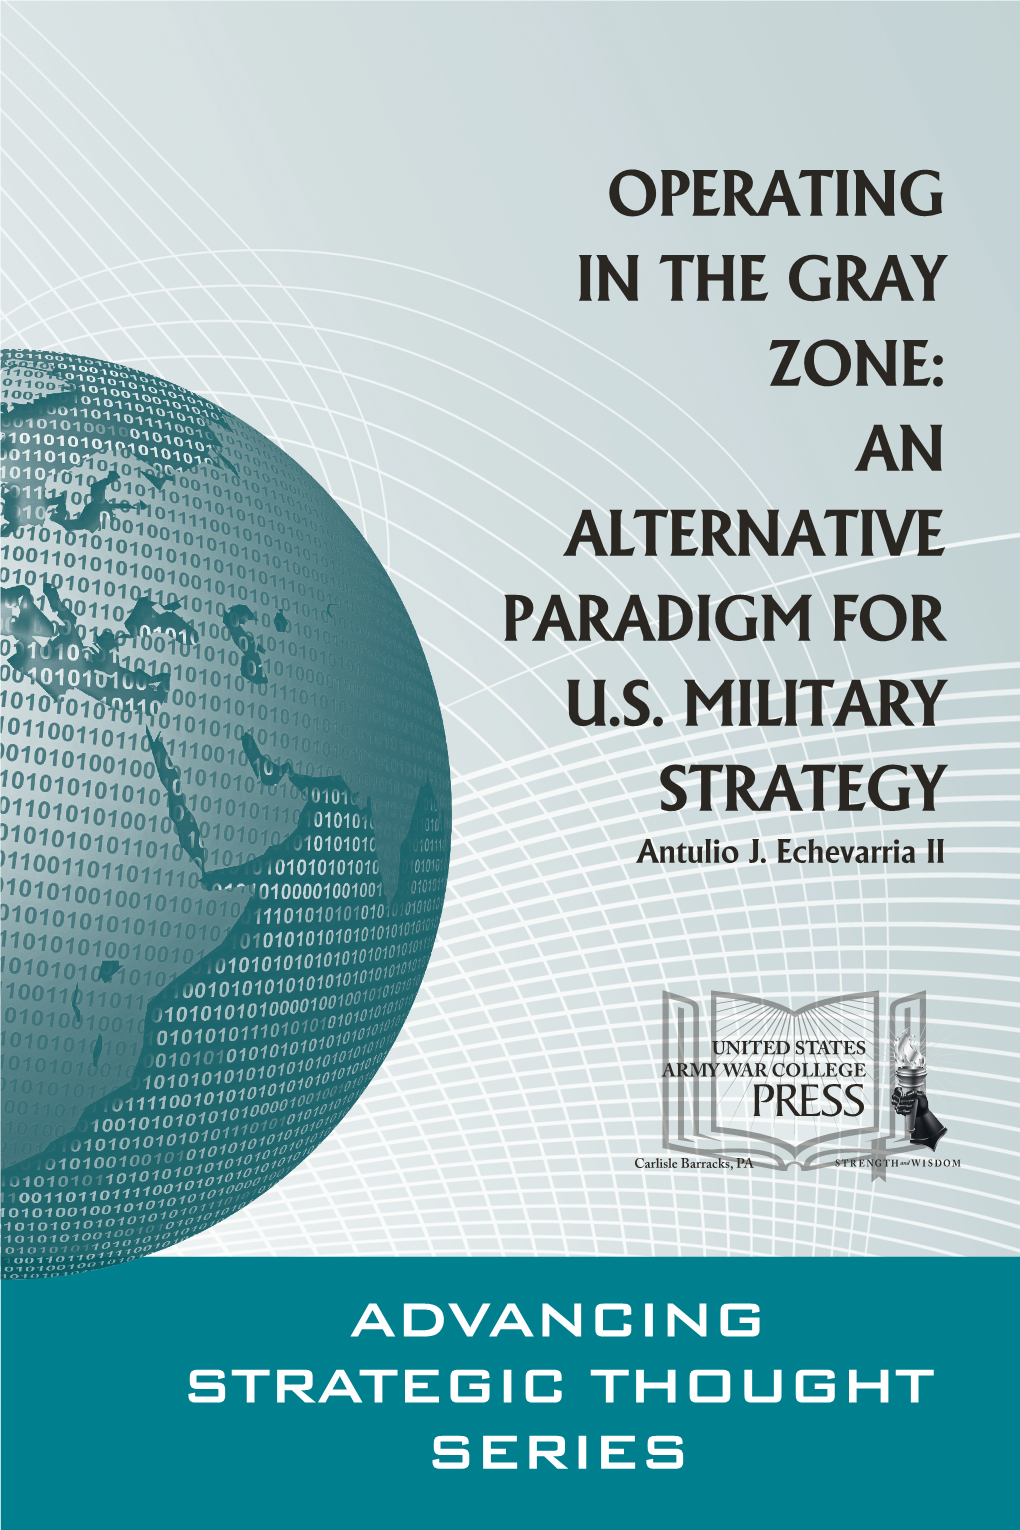 OPERATING in the GRAY ZONE: an ALTERNATIVE PARADIGM for U.S. MILITARY STRATEGY Antulio J